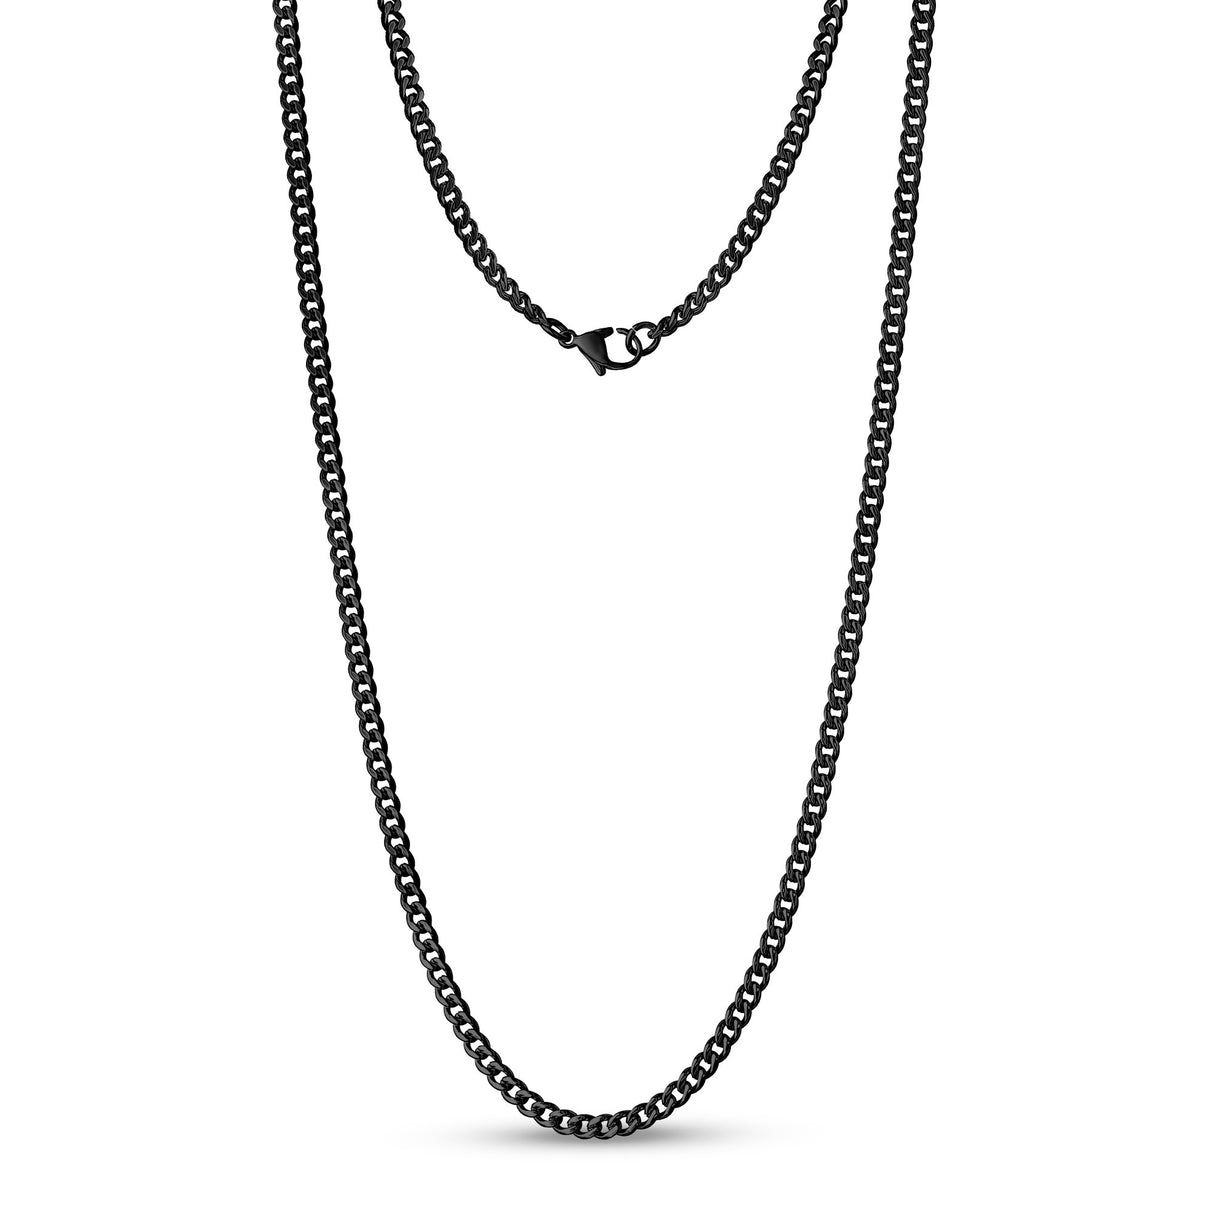 Stainless Steel Chain Necklace | ARMANI EXCHANGE Unisex